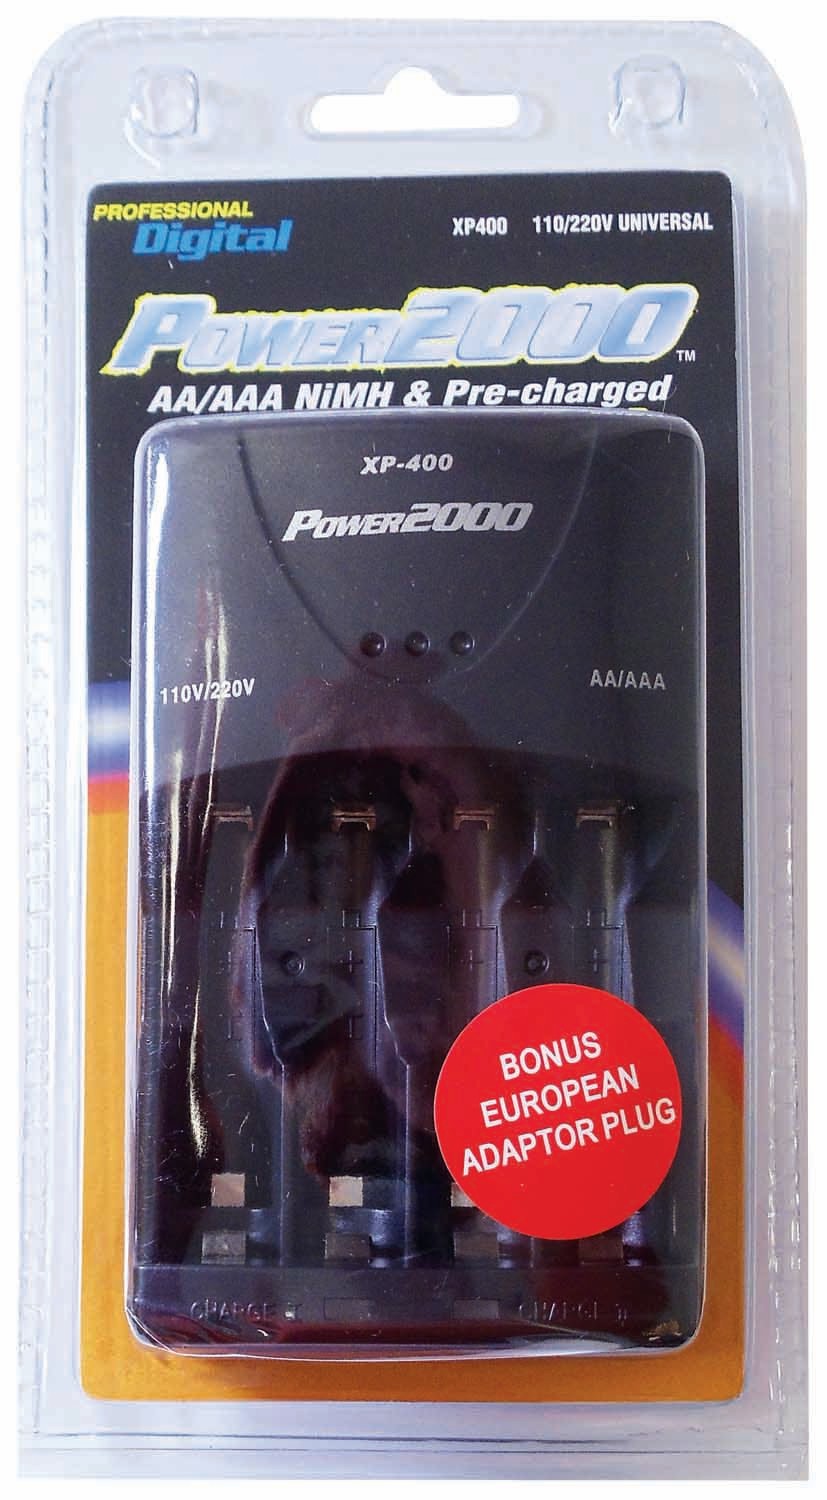 Power2000 - 4 Bay Rapid Battery Charger For Nimh & Pre-Charged "Aa" And "Aaa" Cells